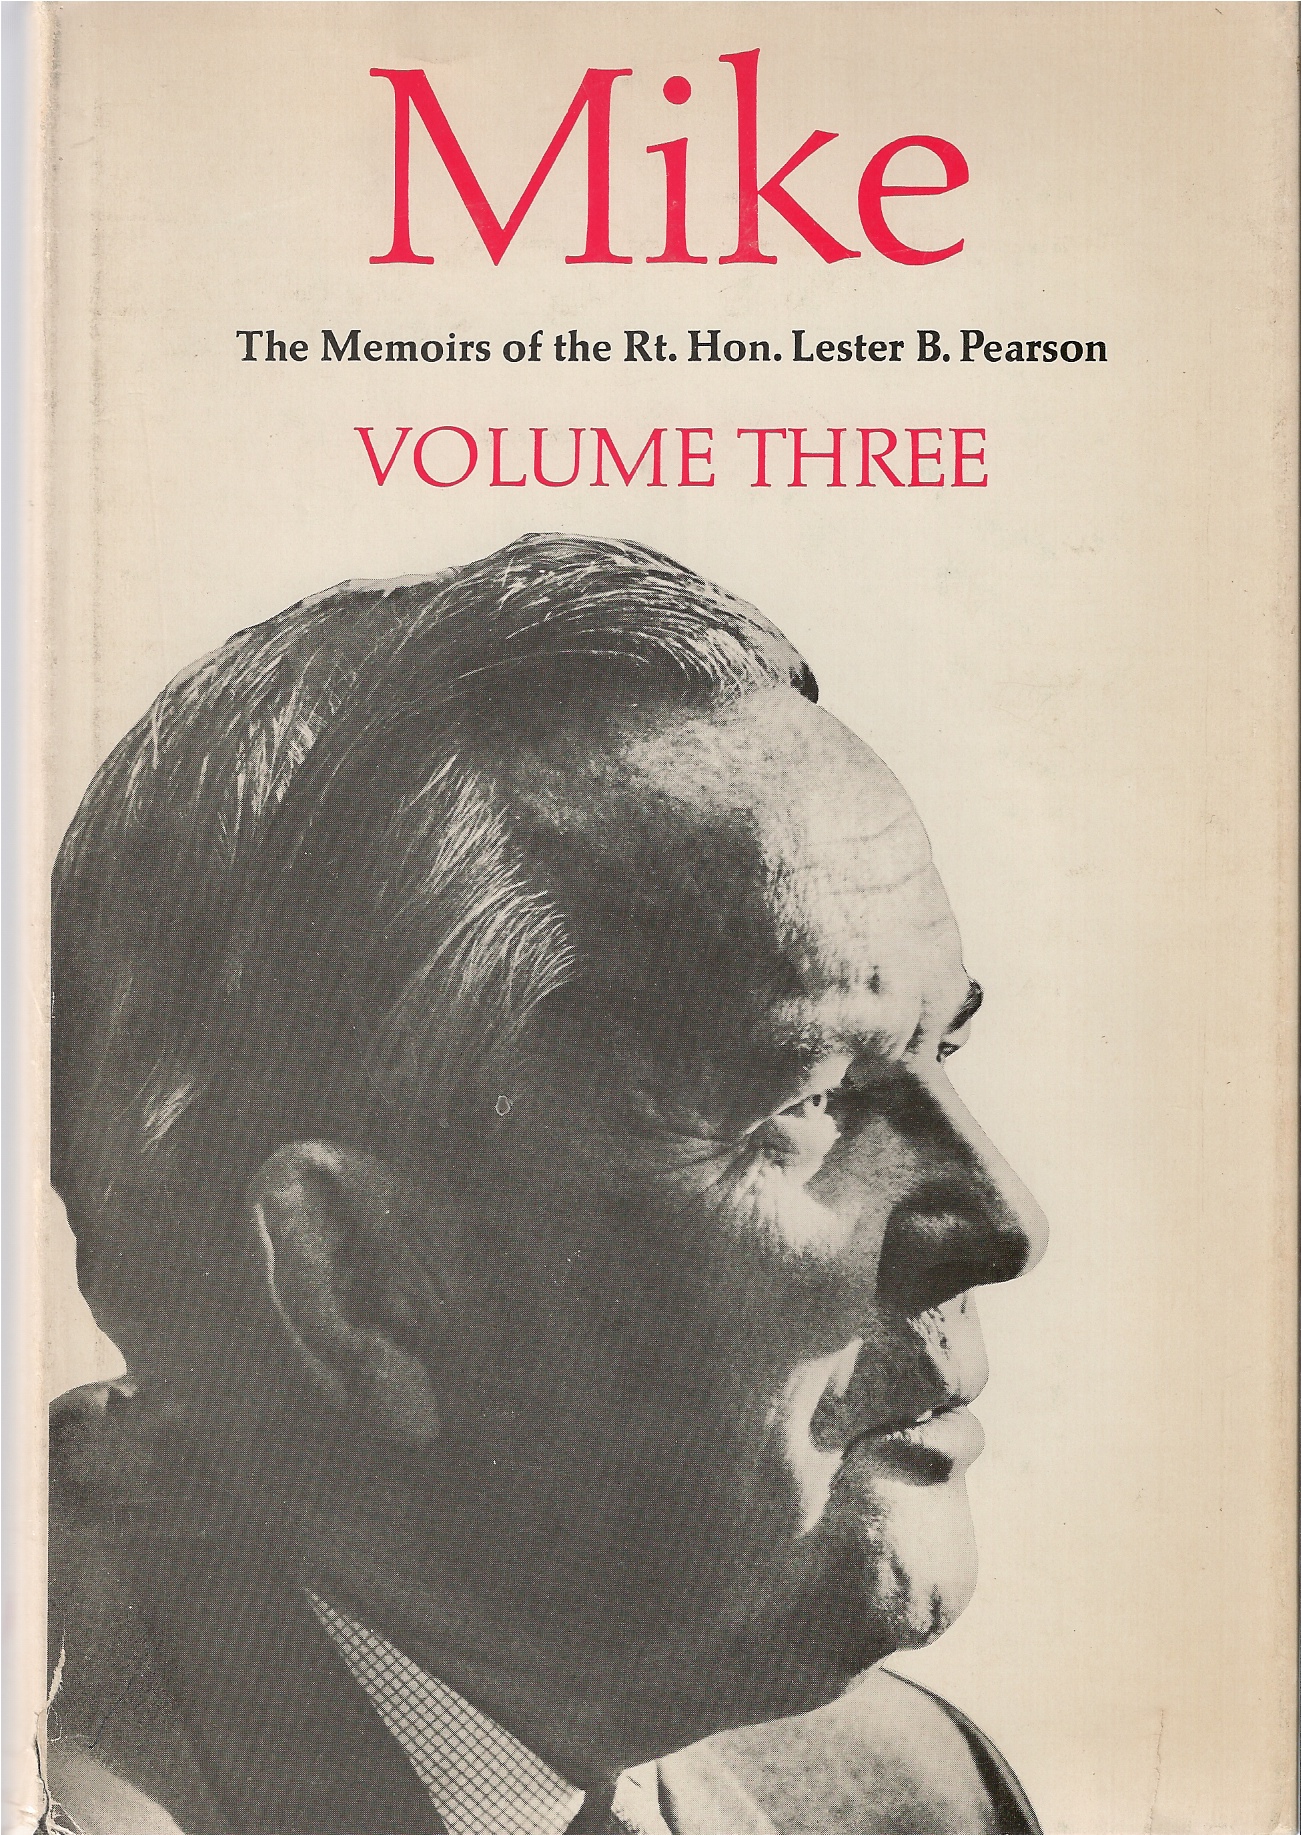 PEARSON, LESTER B - Mike, Volume 3, 1957 - 1968 the Memoirs of the Right Honourable Lester B. Pearson